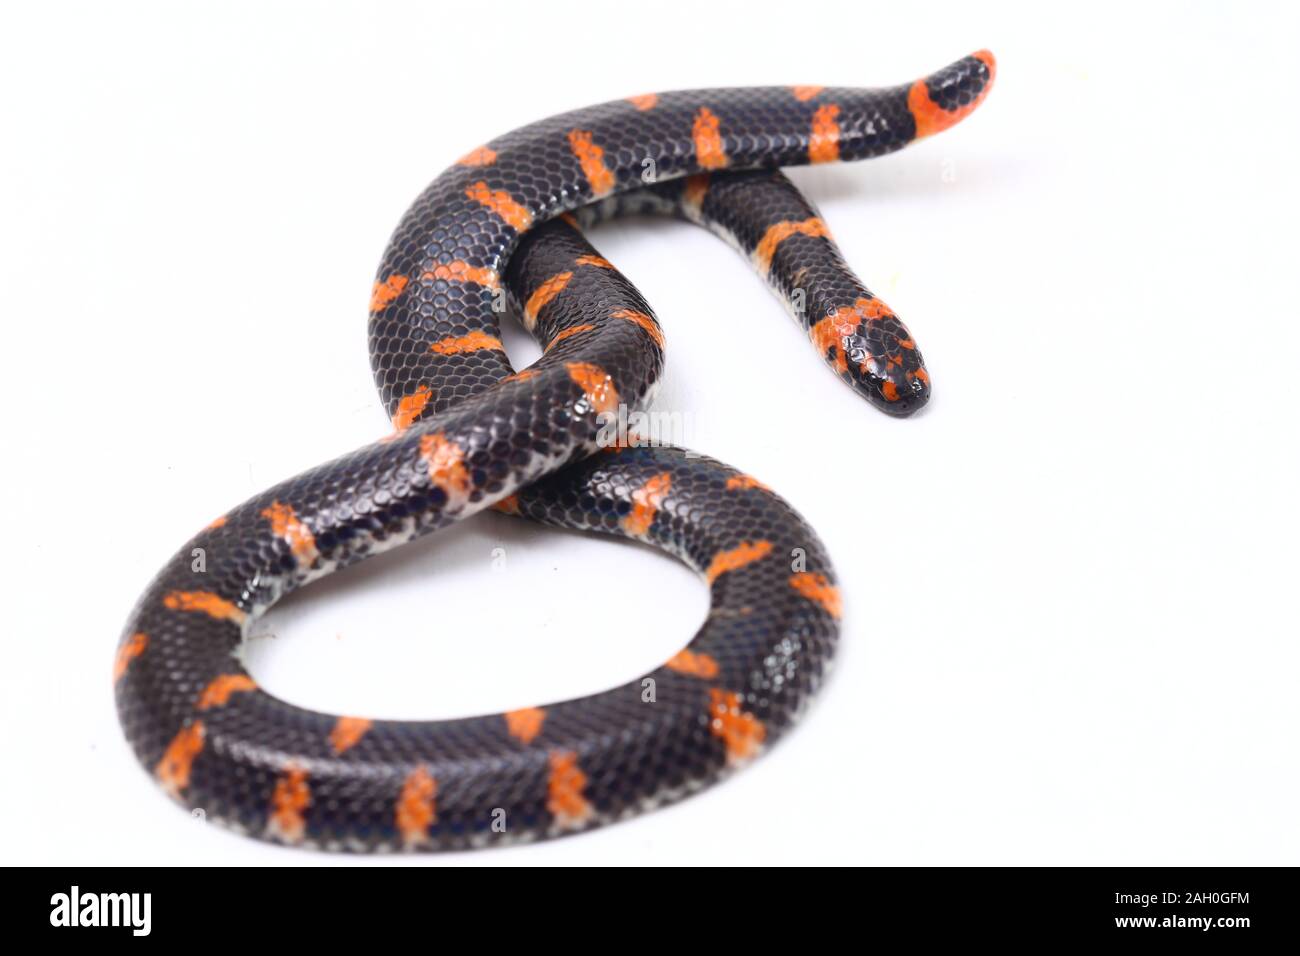 https://c8.alamy.com/comp/2AH0GFM/red-tailed-pipe-snake-scientific-name-cylindrophis-ruffus-isolate-on-white-background-2AH0GFM.jpg